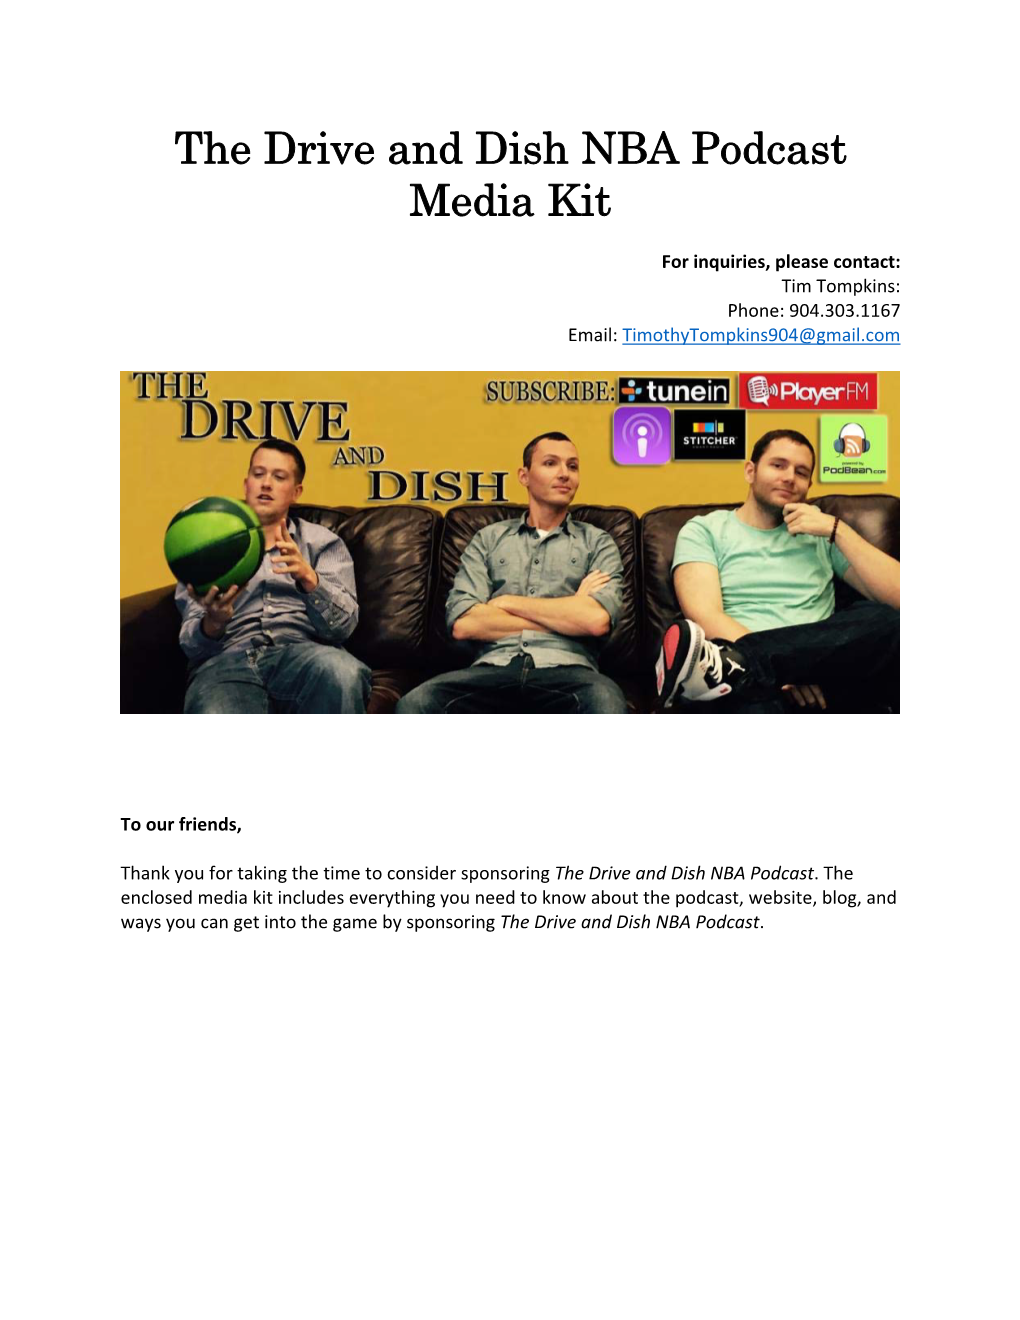 The Drive and Dish NBA Podcast Media